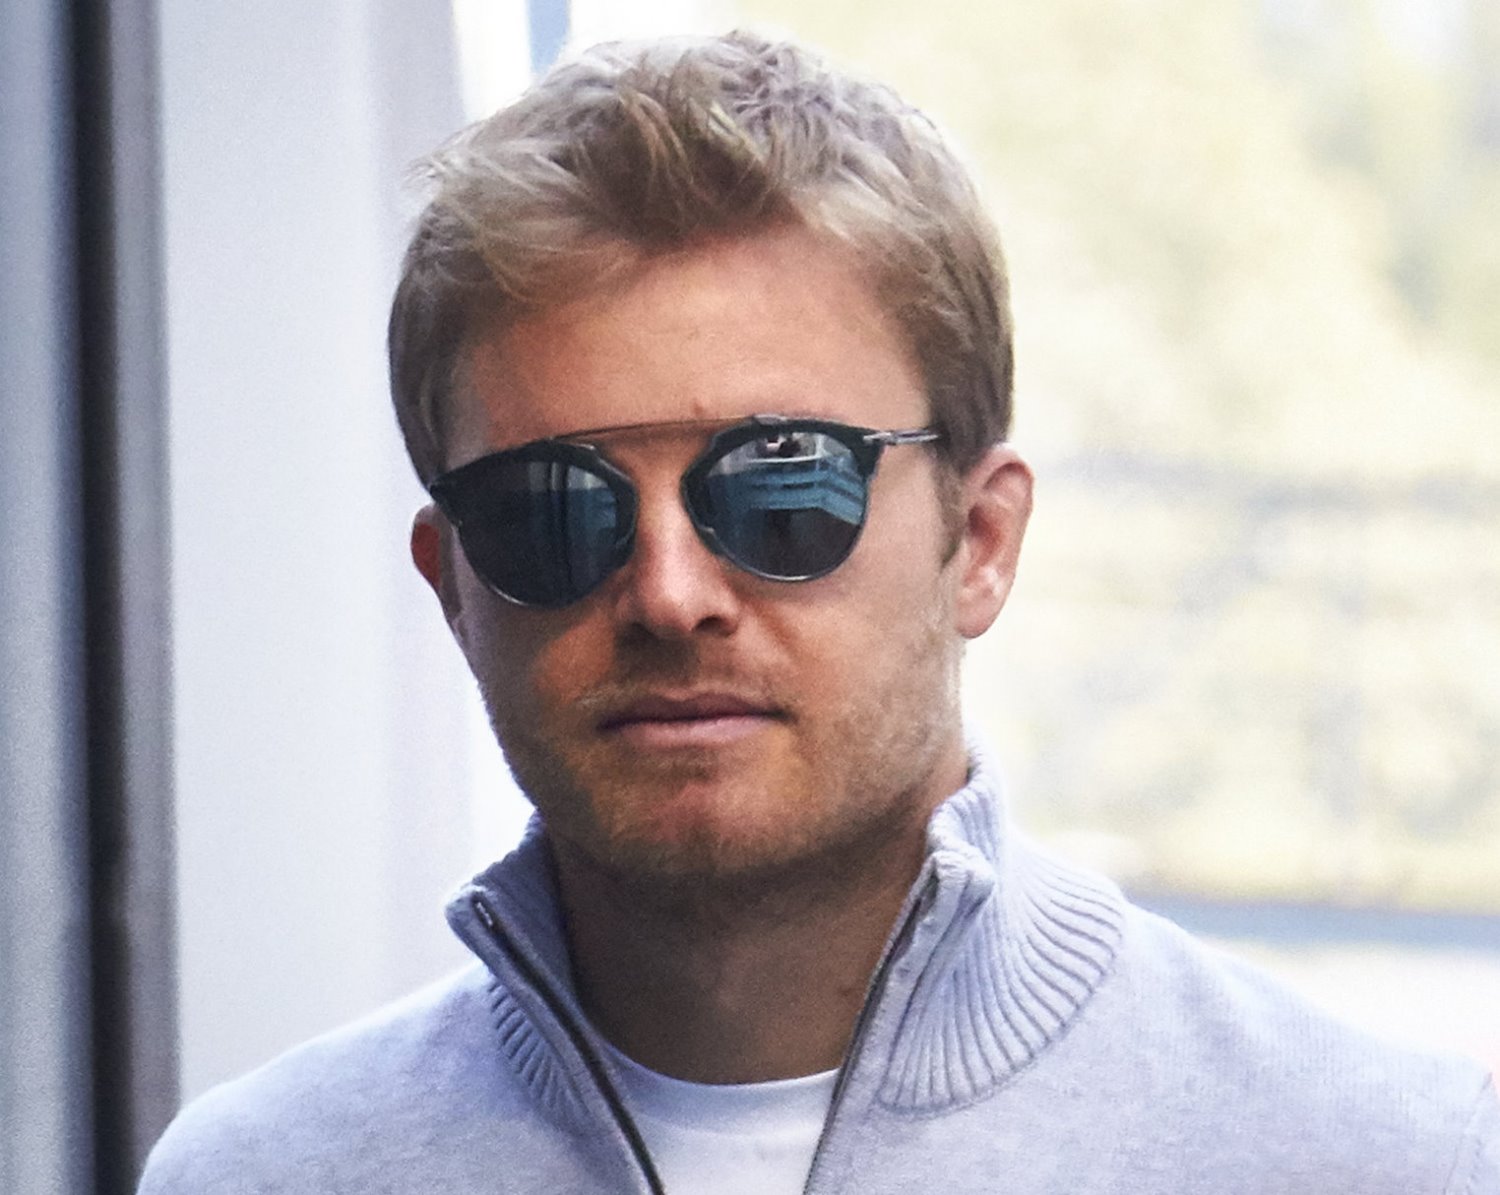 Rosberg had to grow some bigger ones